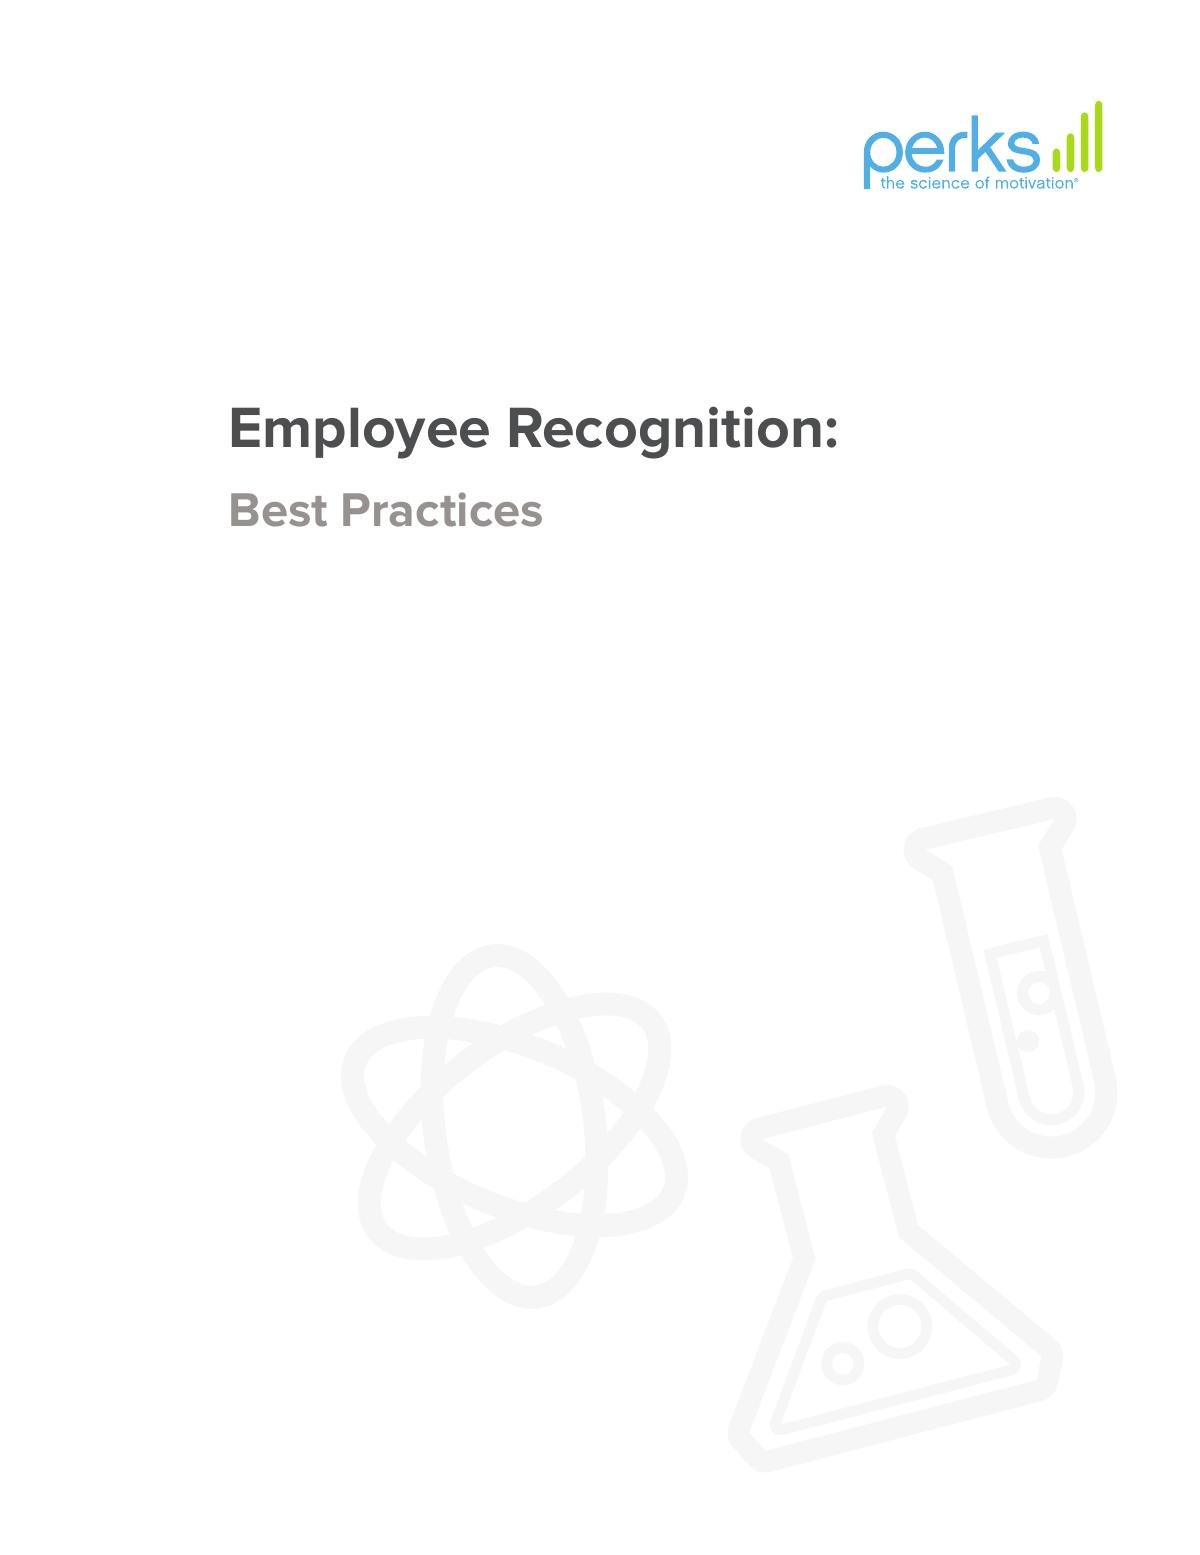 Employee Recognition Best Practices